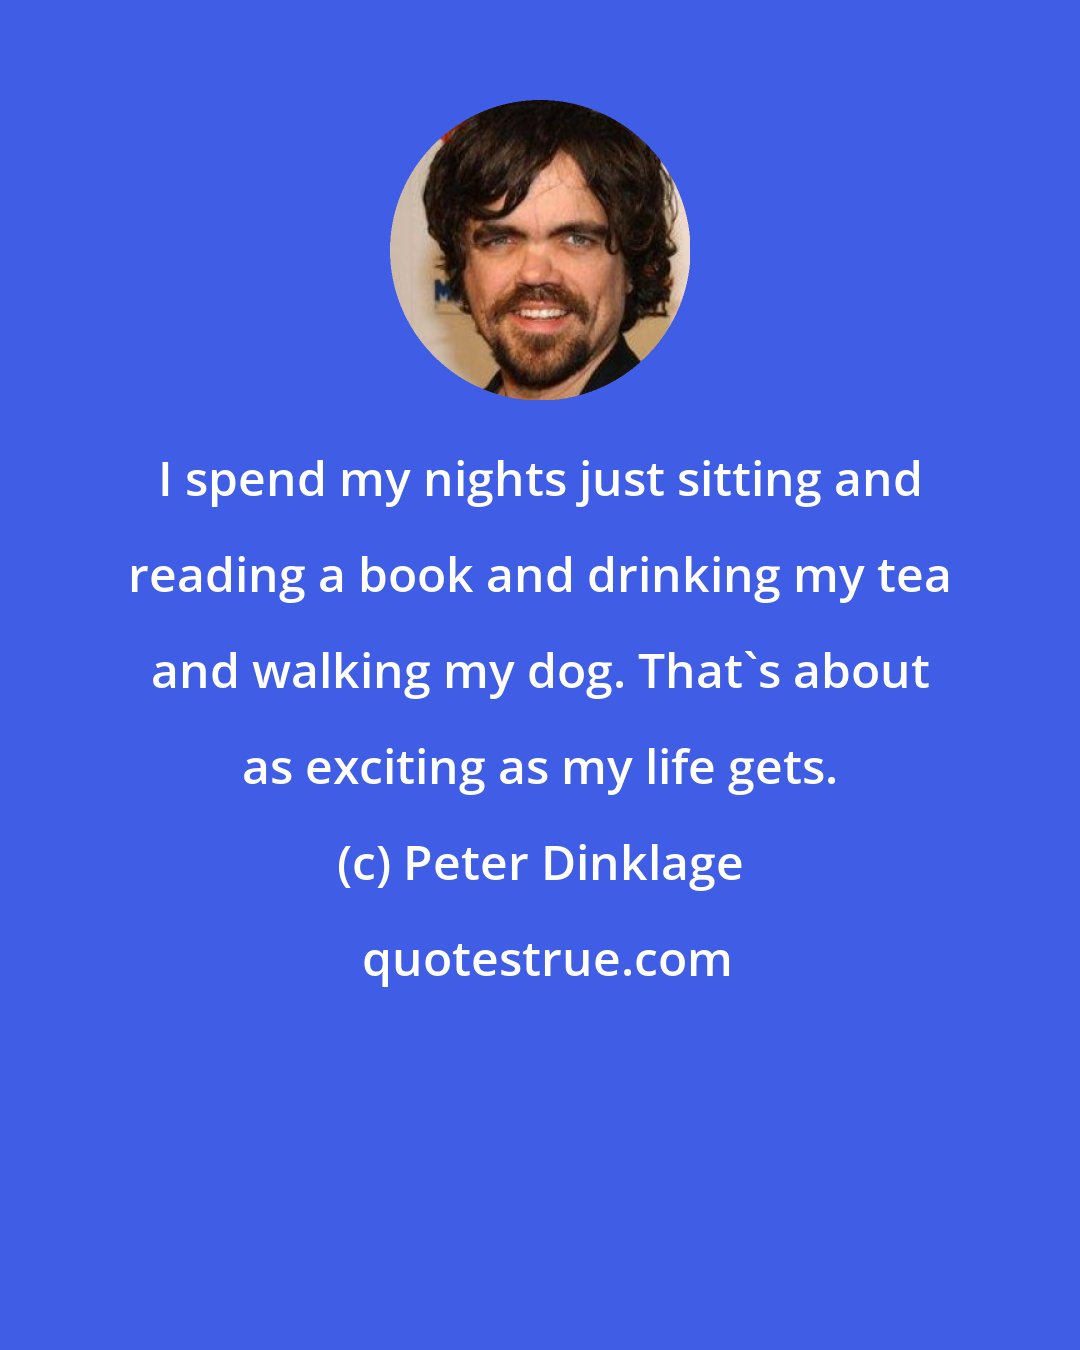 Peter Dinklage: I spend my nights just sitting and reading a book and drinking my tea and walking my dog. That's about as exciting as my life gets.